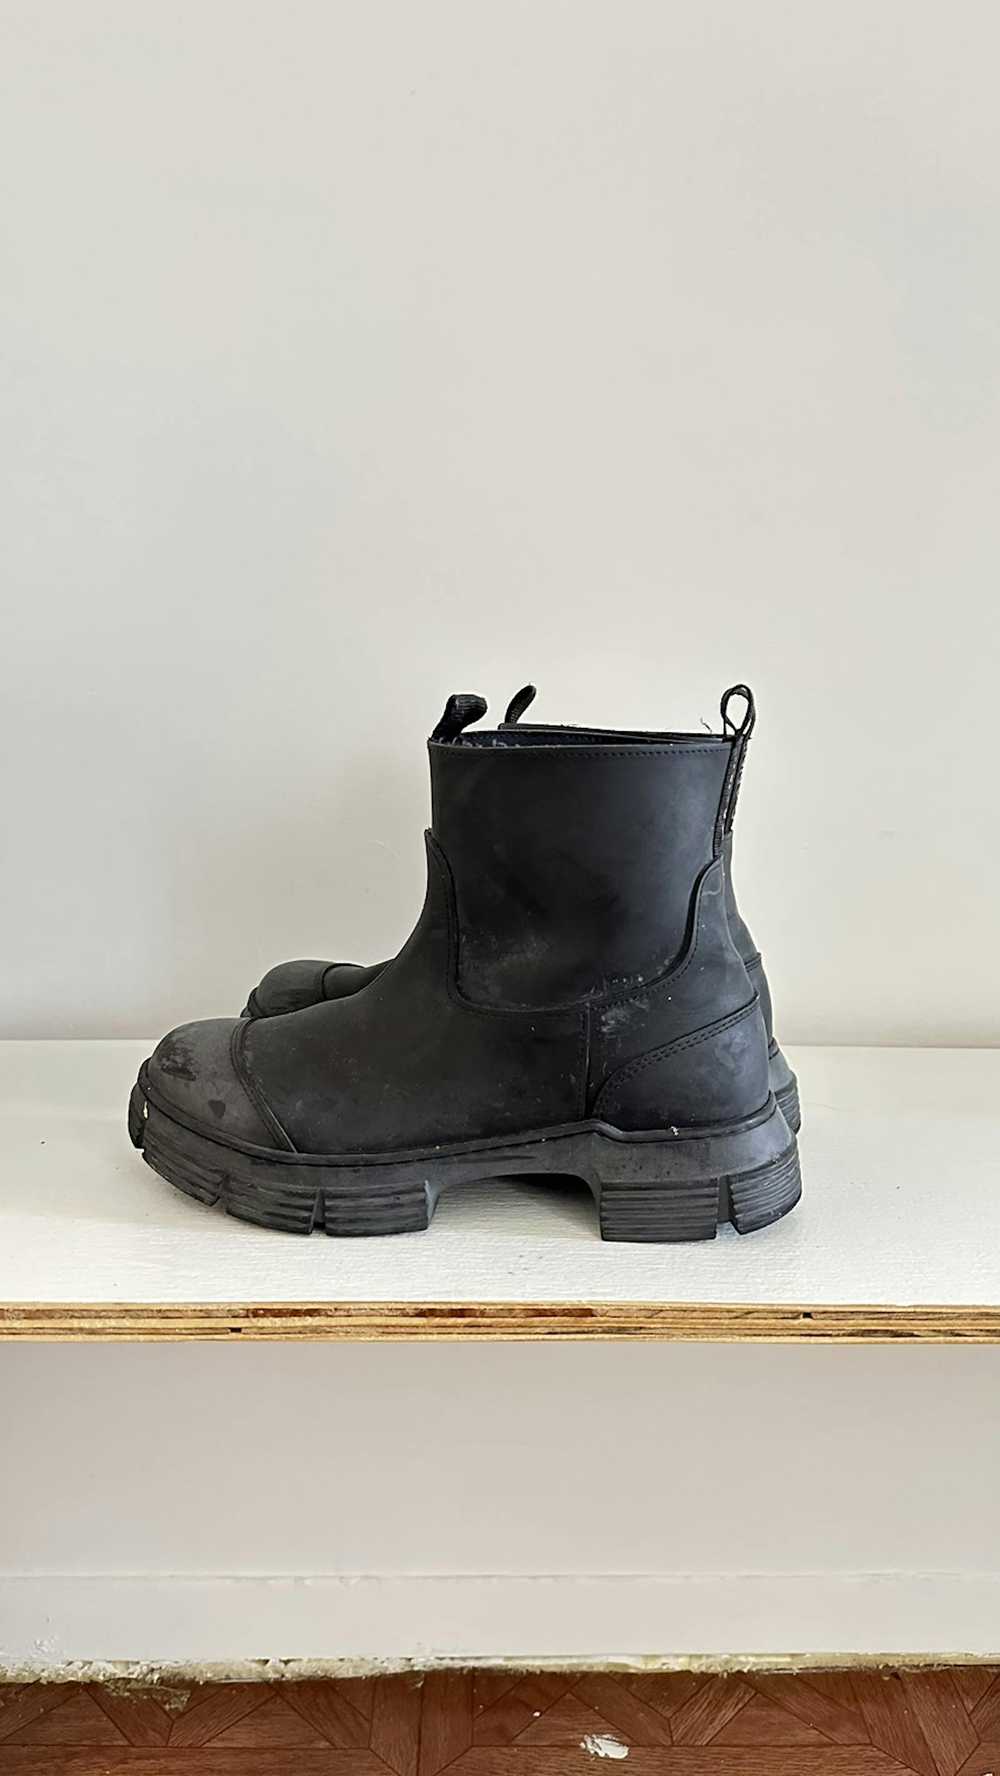 Ganni Ganni Recycled Rubber City Ankle Boots - image 3